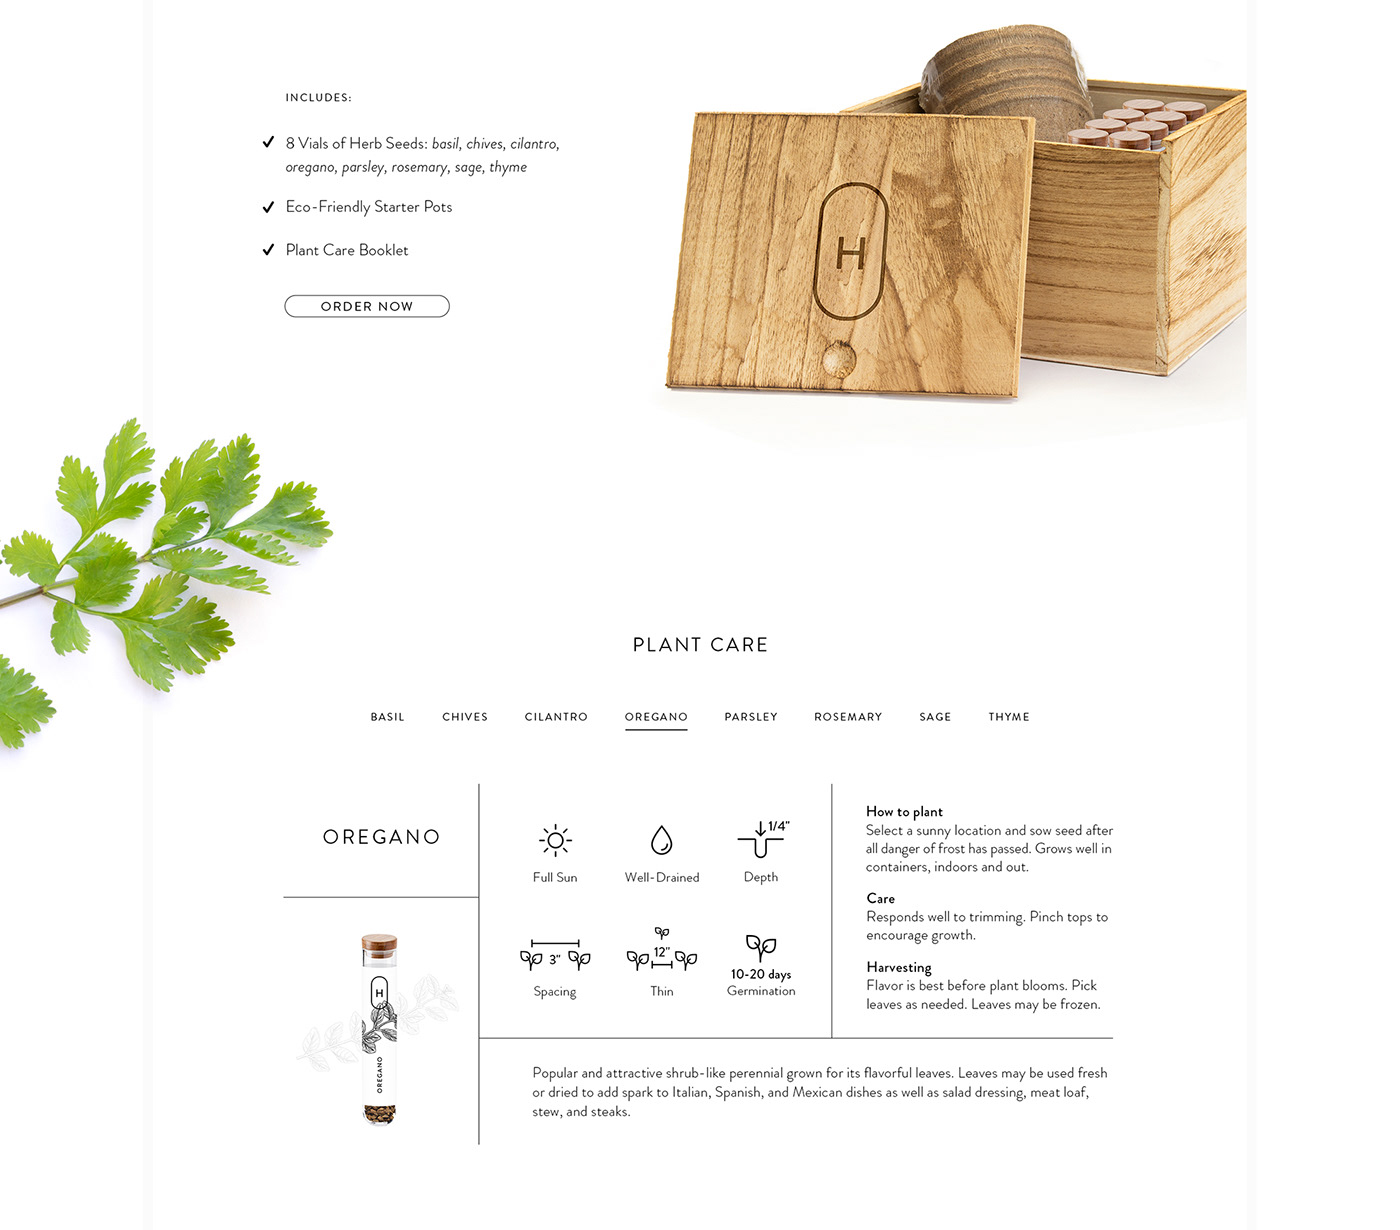 herbs gardening seeds kit plants Photography  websites creative Packaging graphic design 